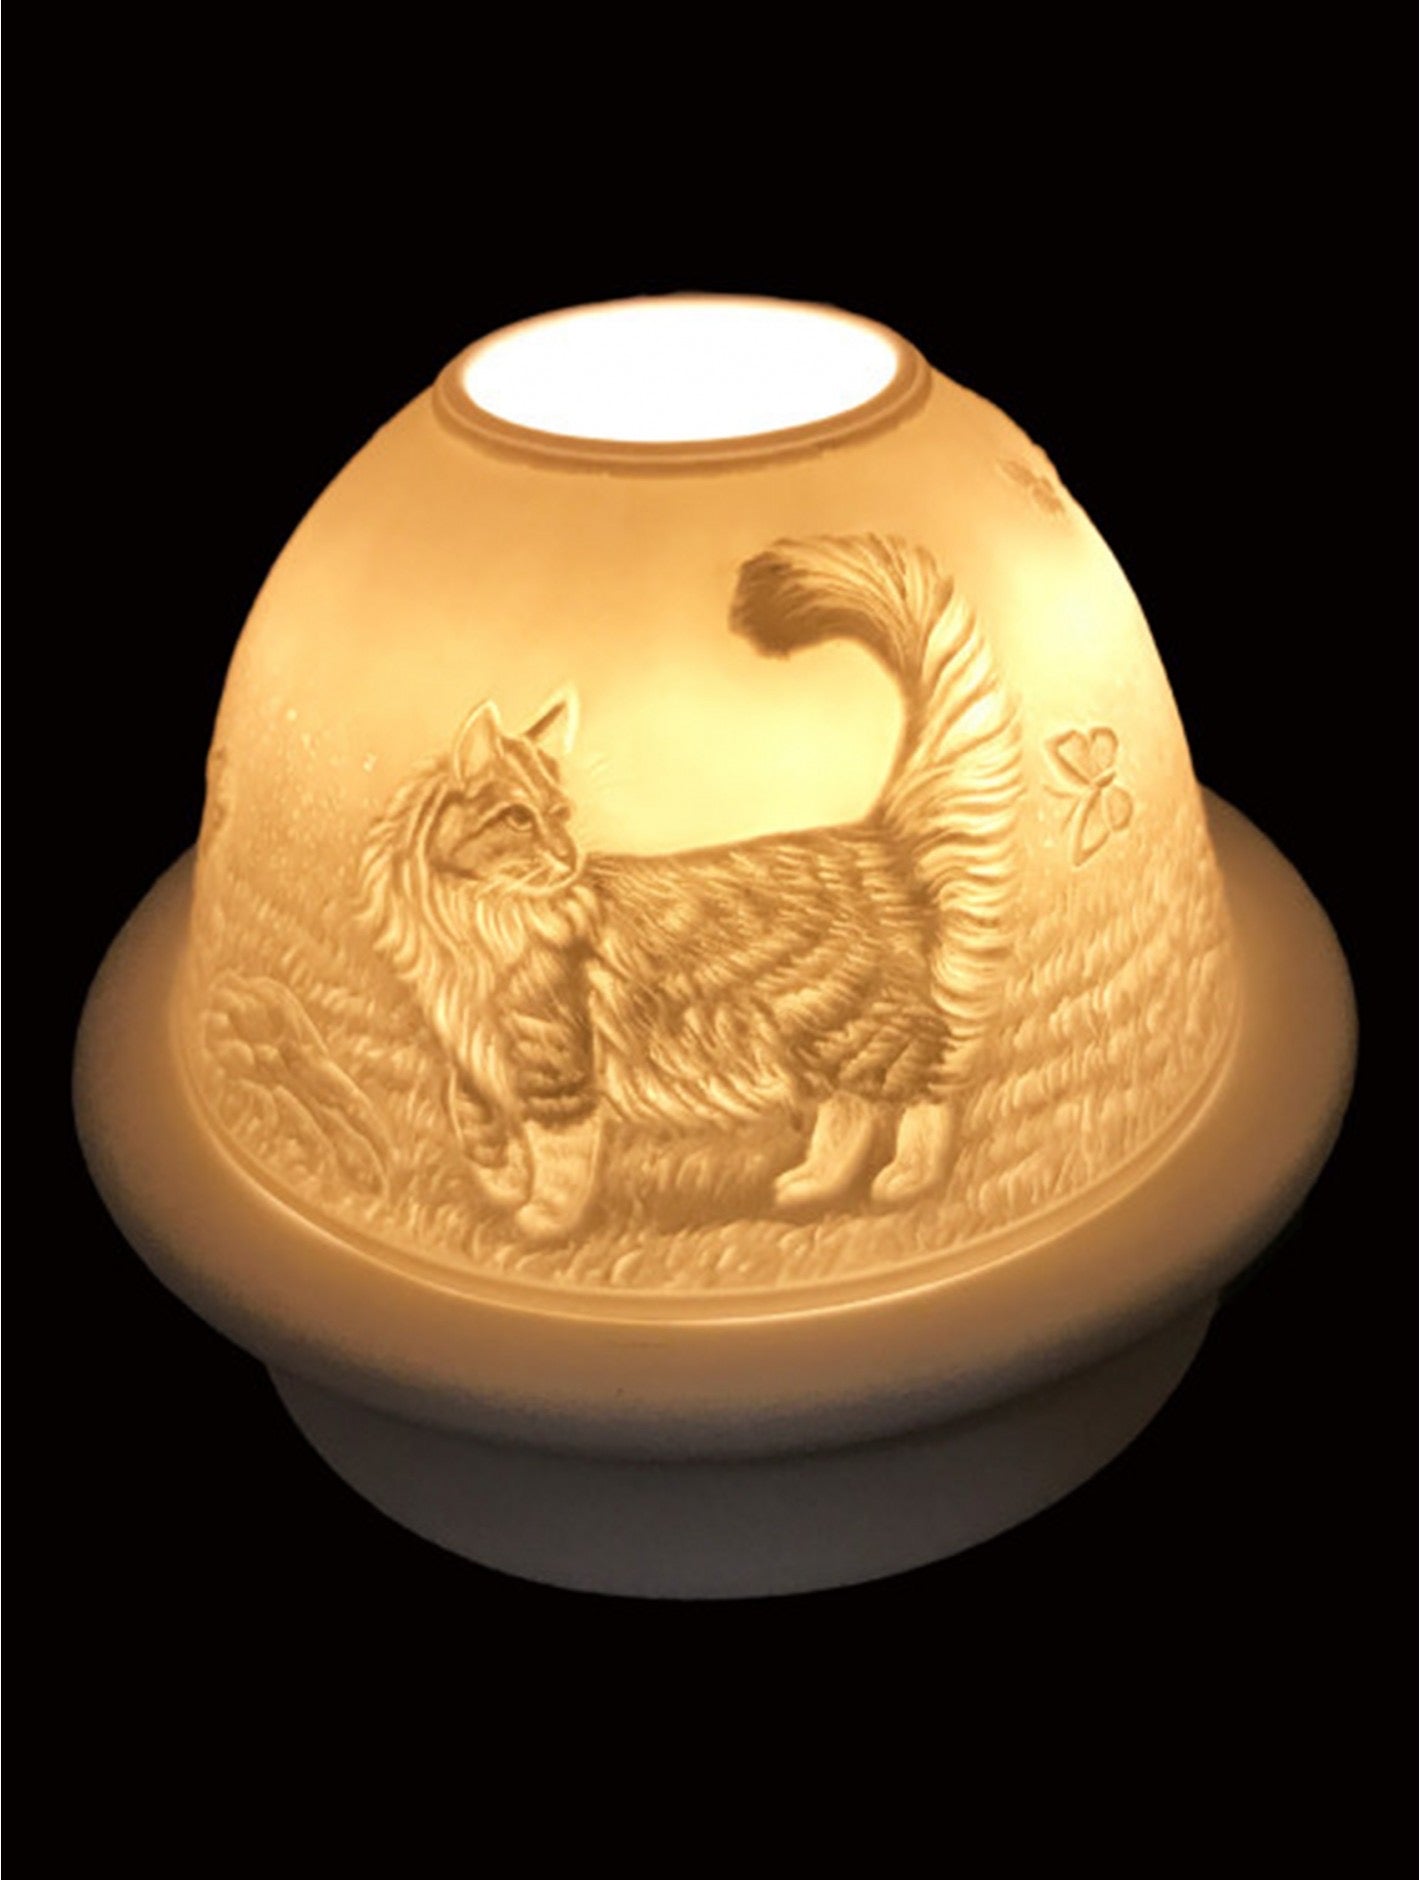 Glowing candle dome with cat design